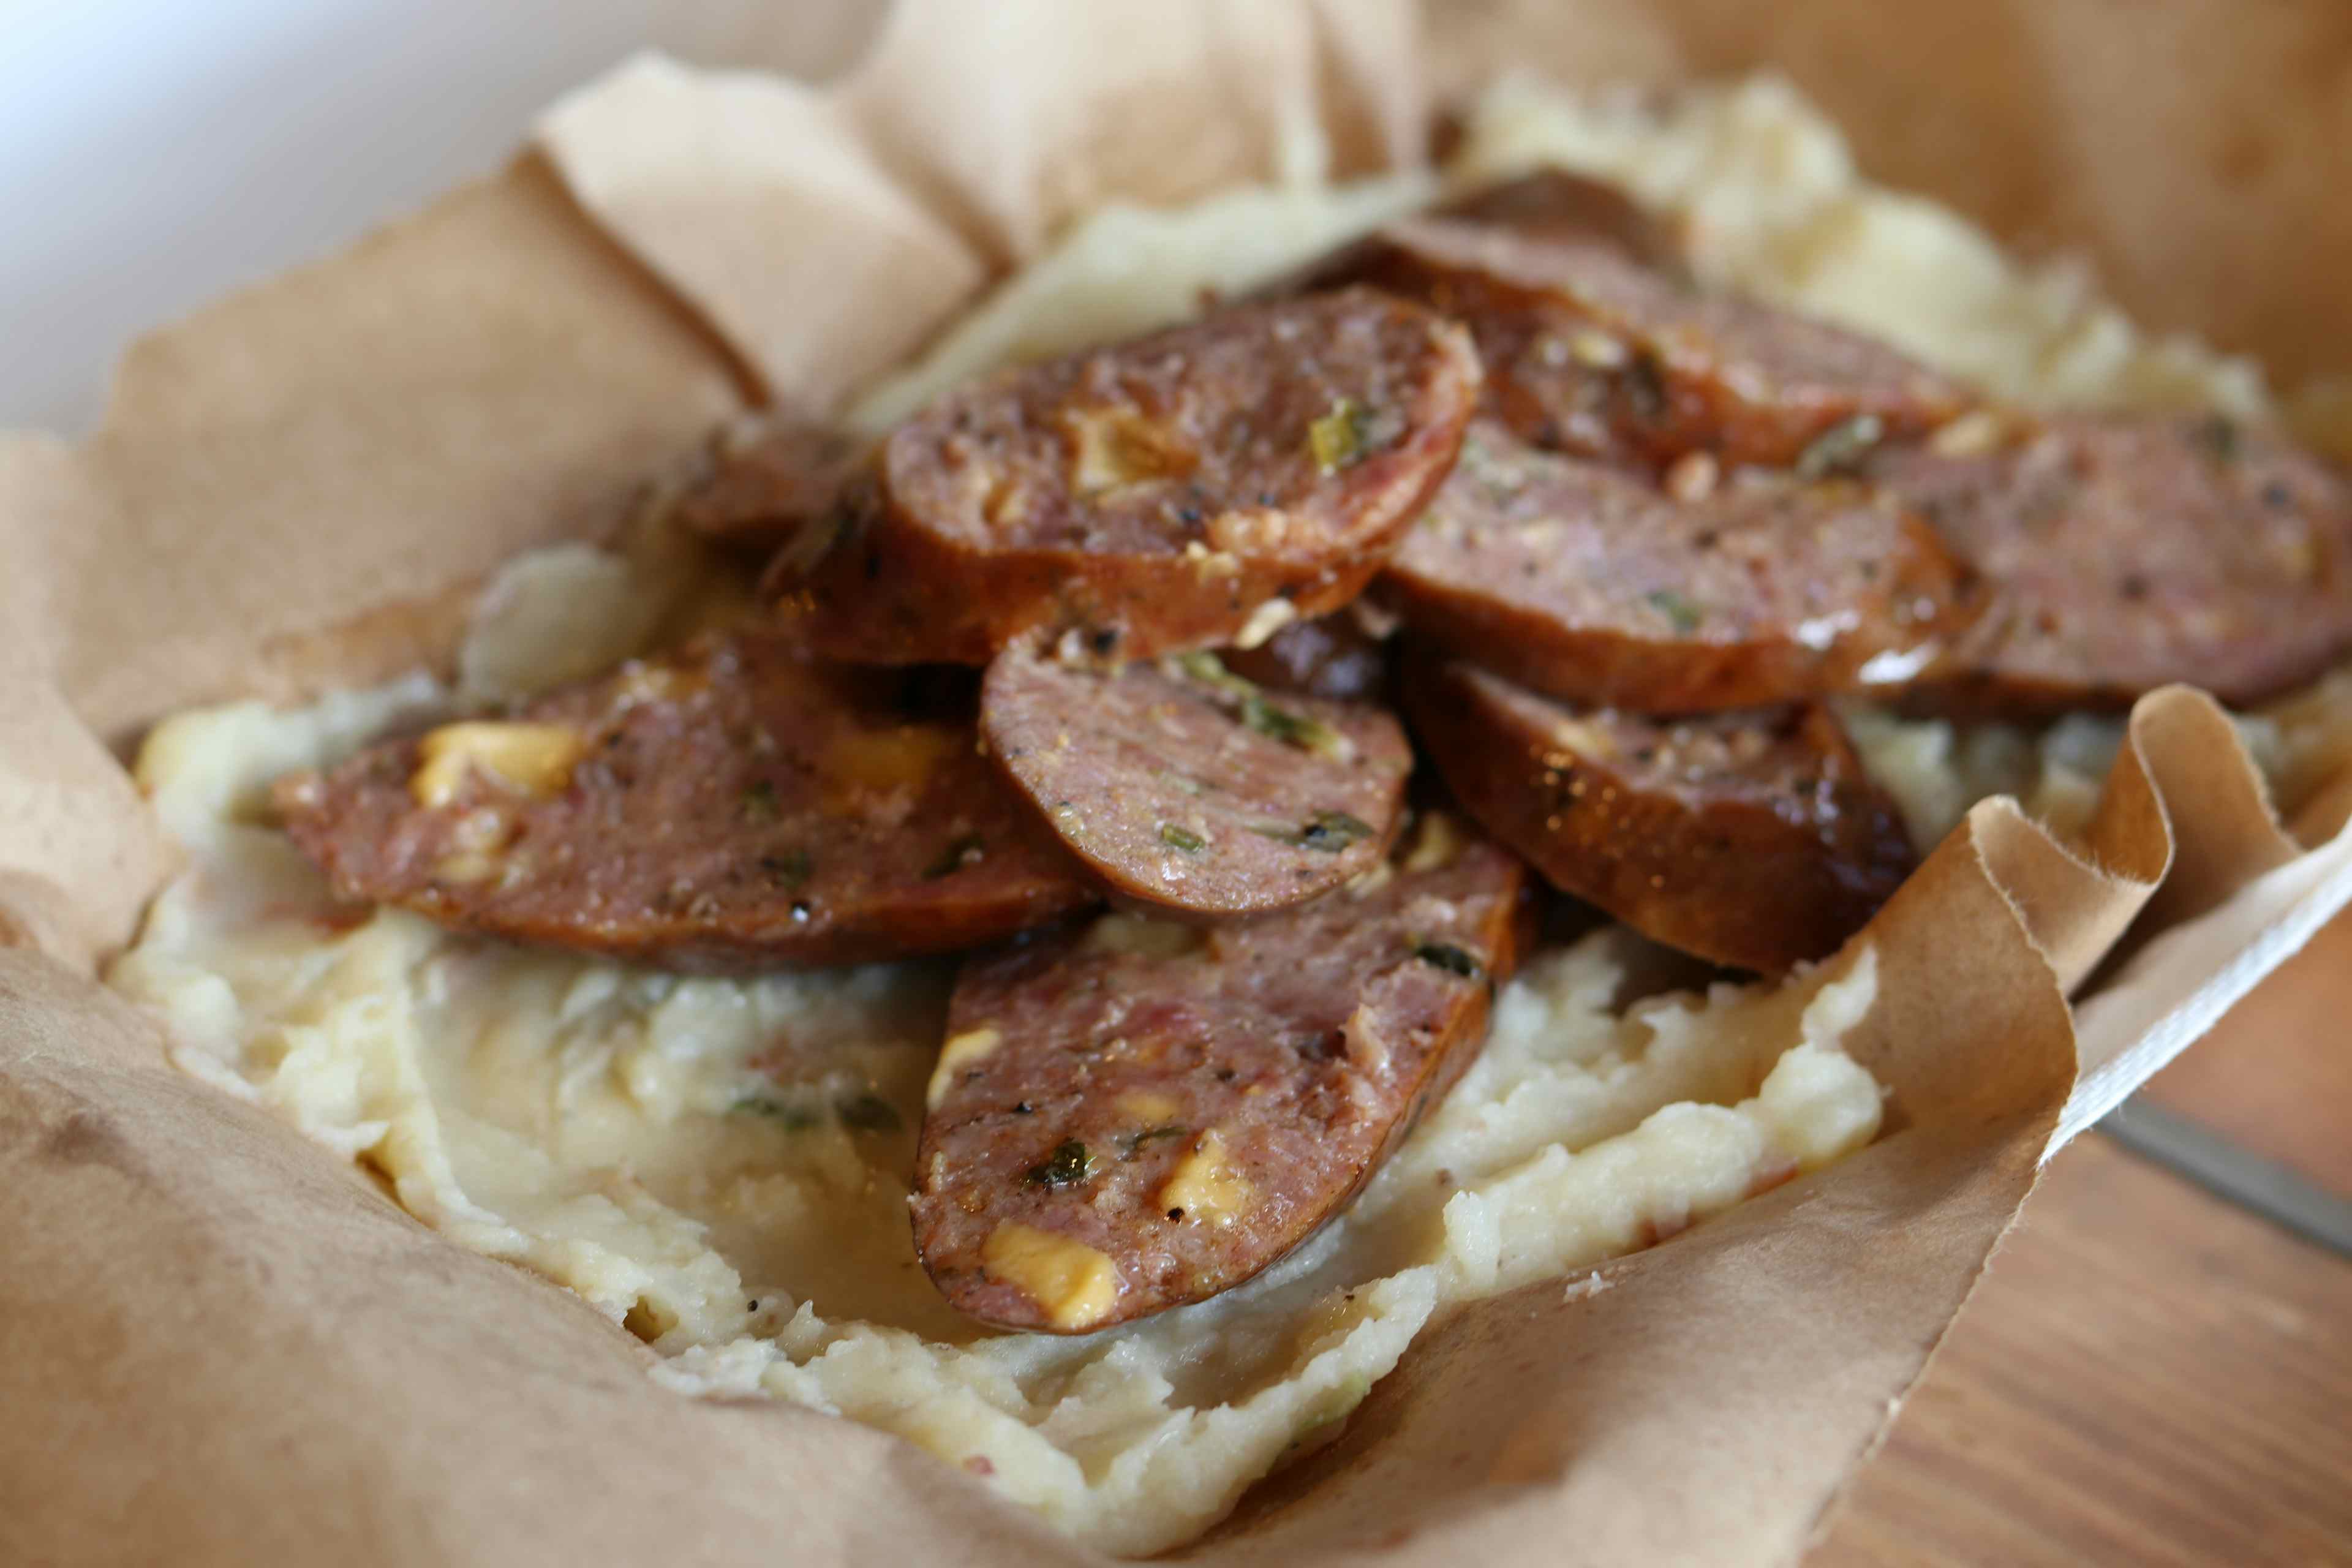 Rapid City Journal: Bangers and mash: comfort food from across the pond